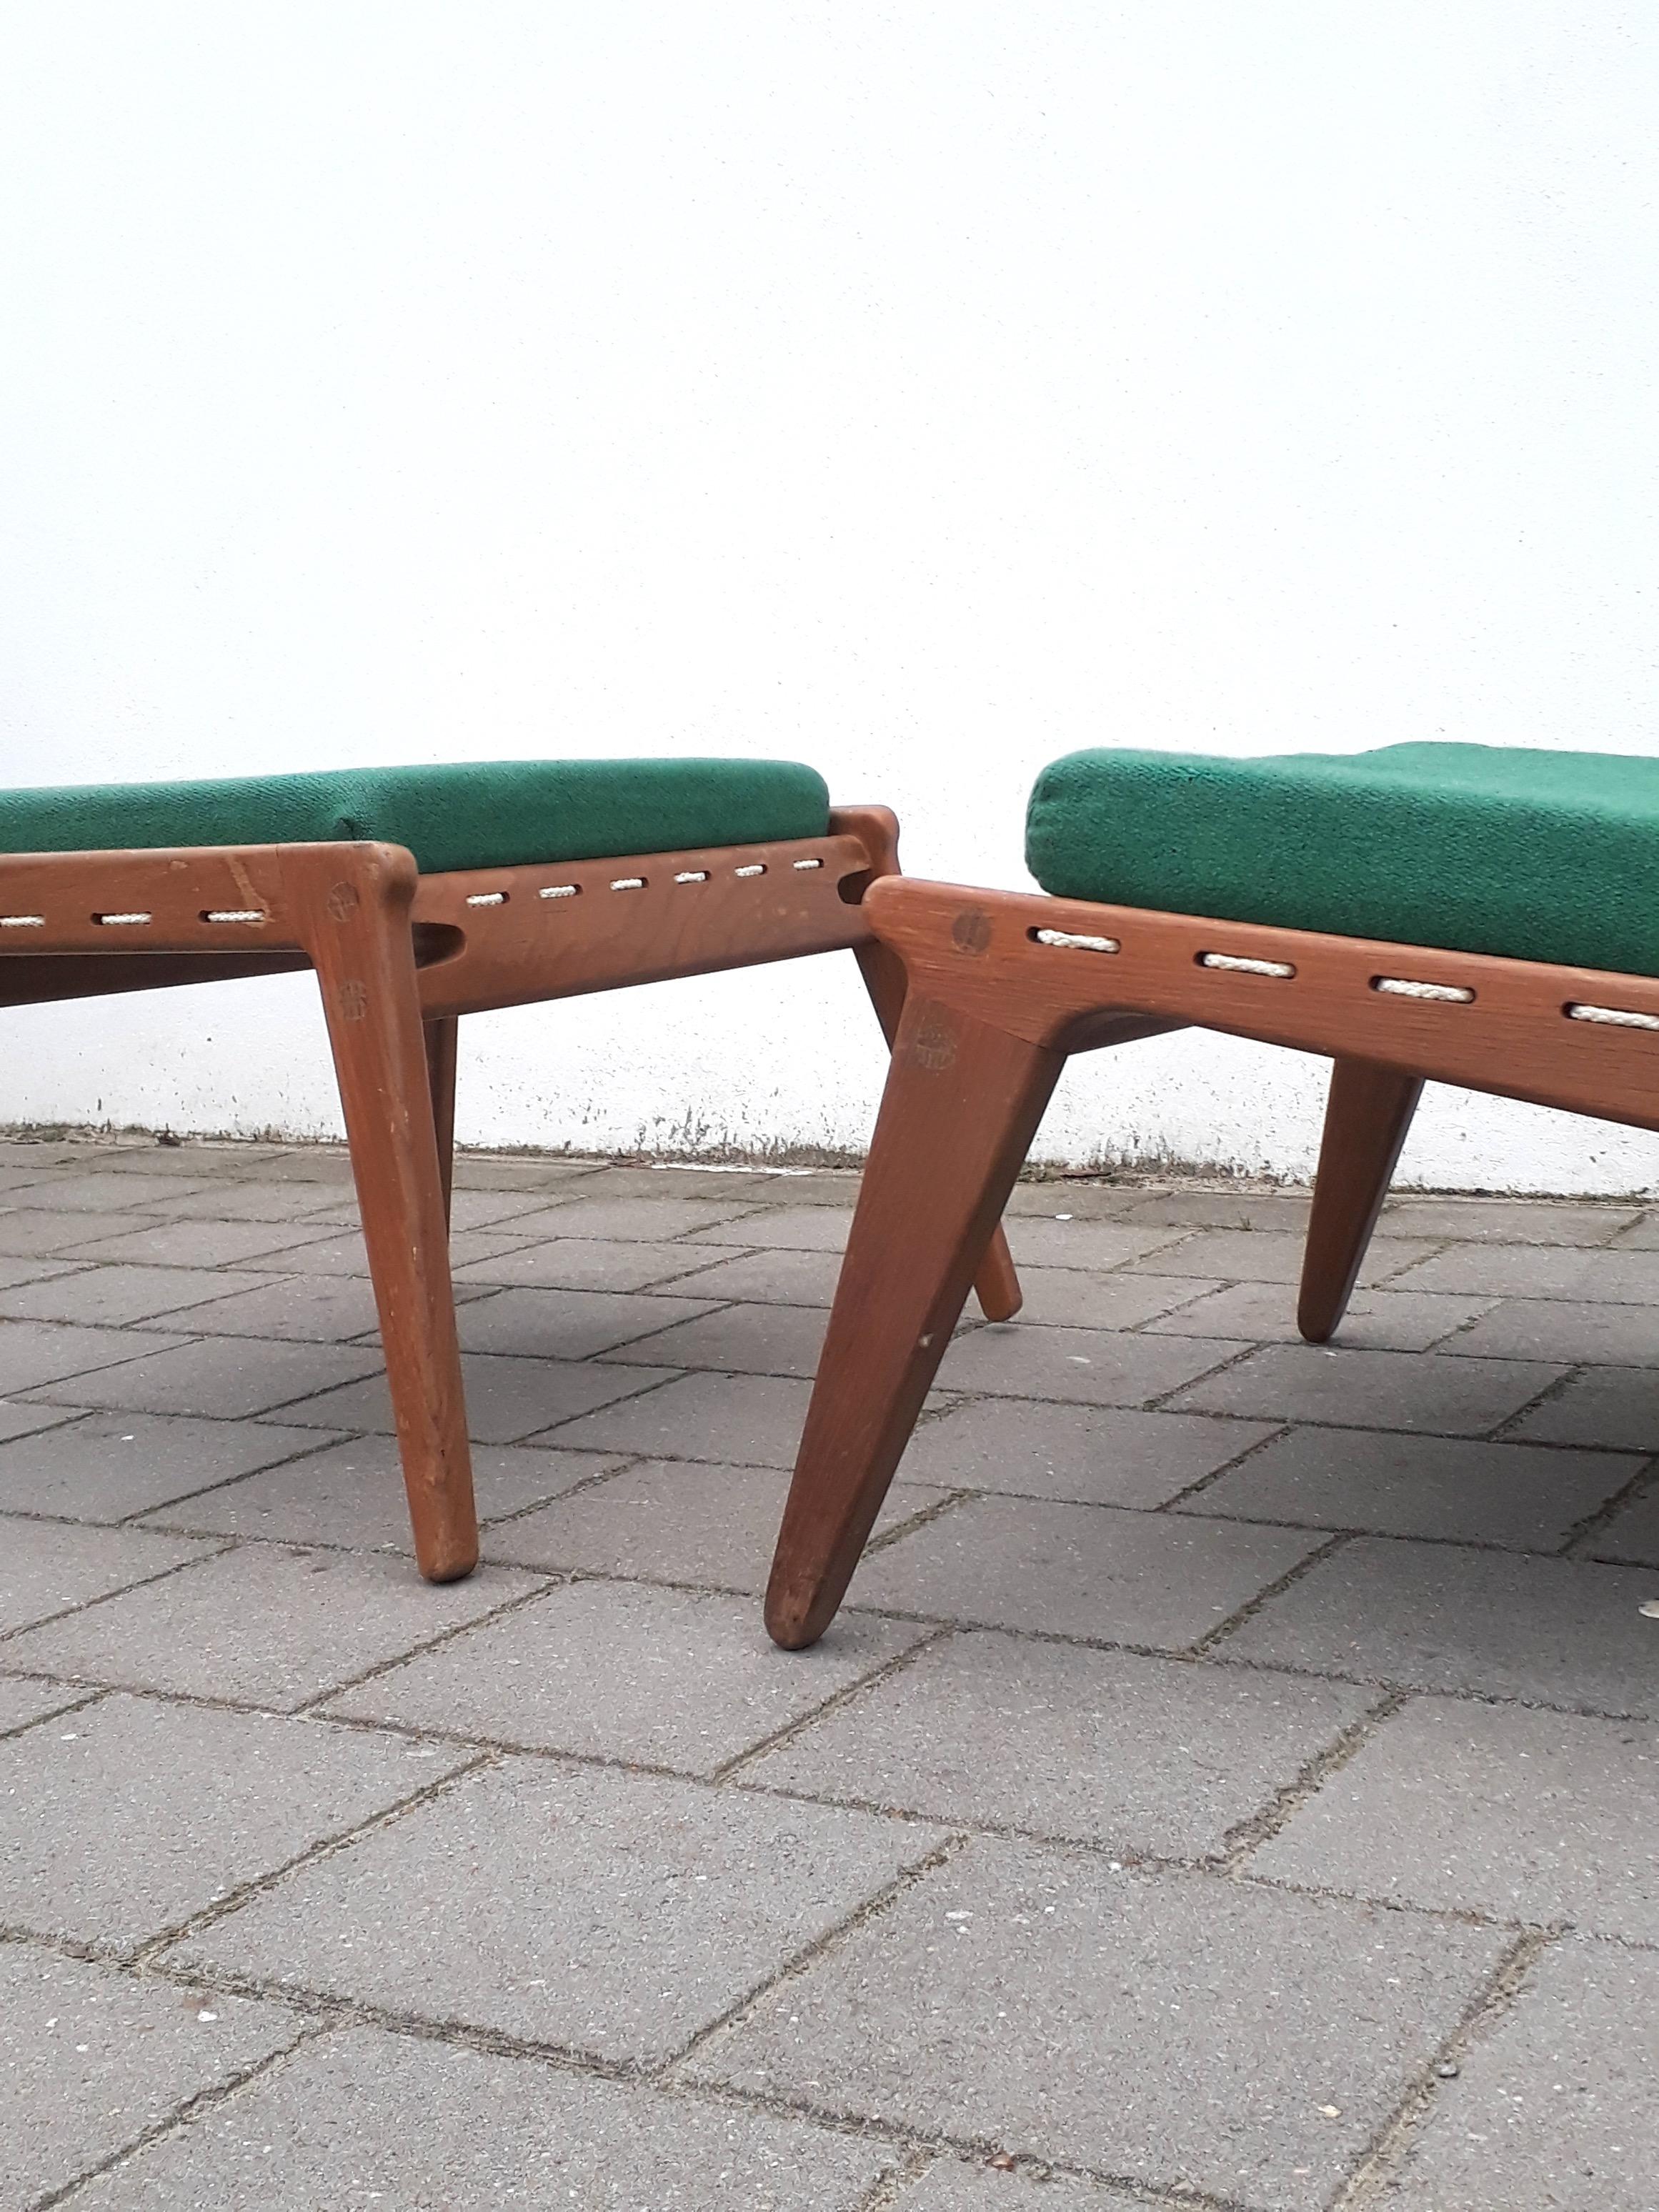 Mid-Century Modern 2 German Hunting Chairs Organic Teak Wood Attributed to Otto Frei, 1950s For Sale